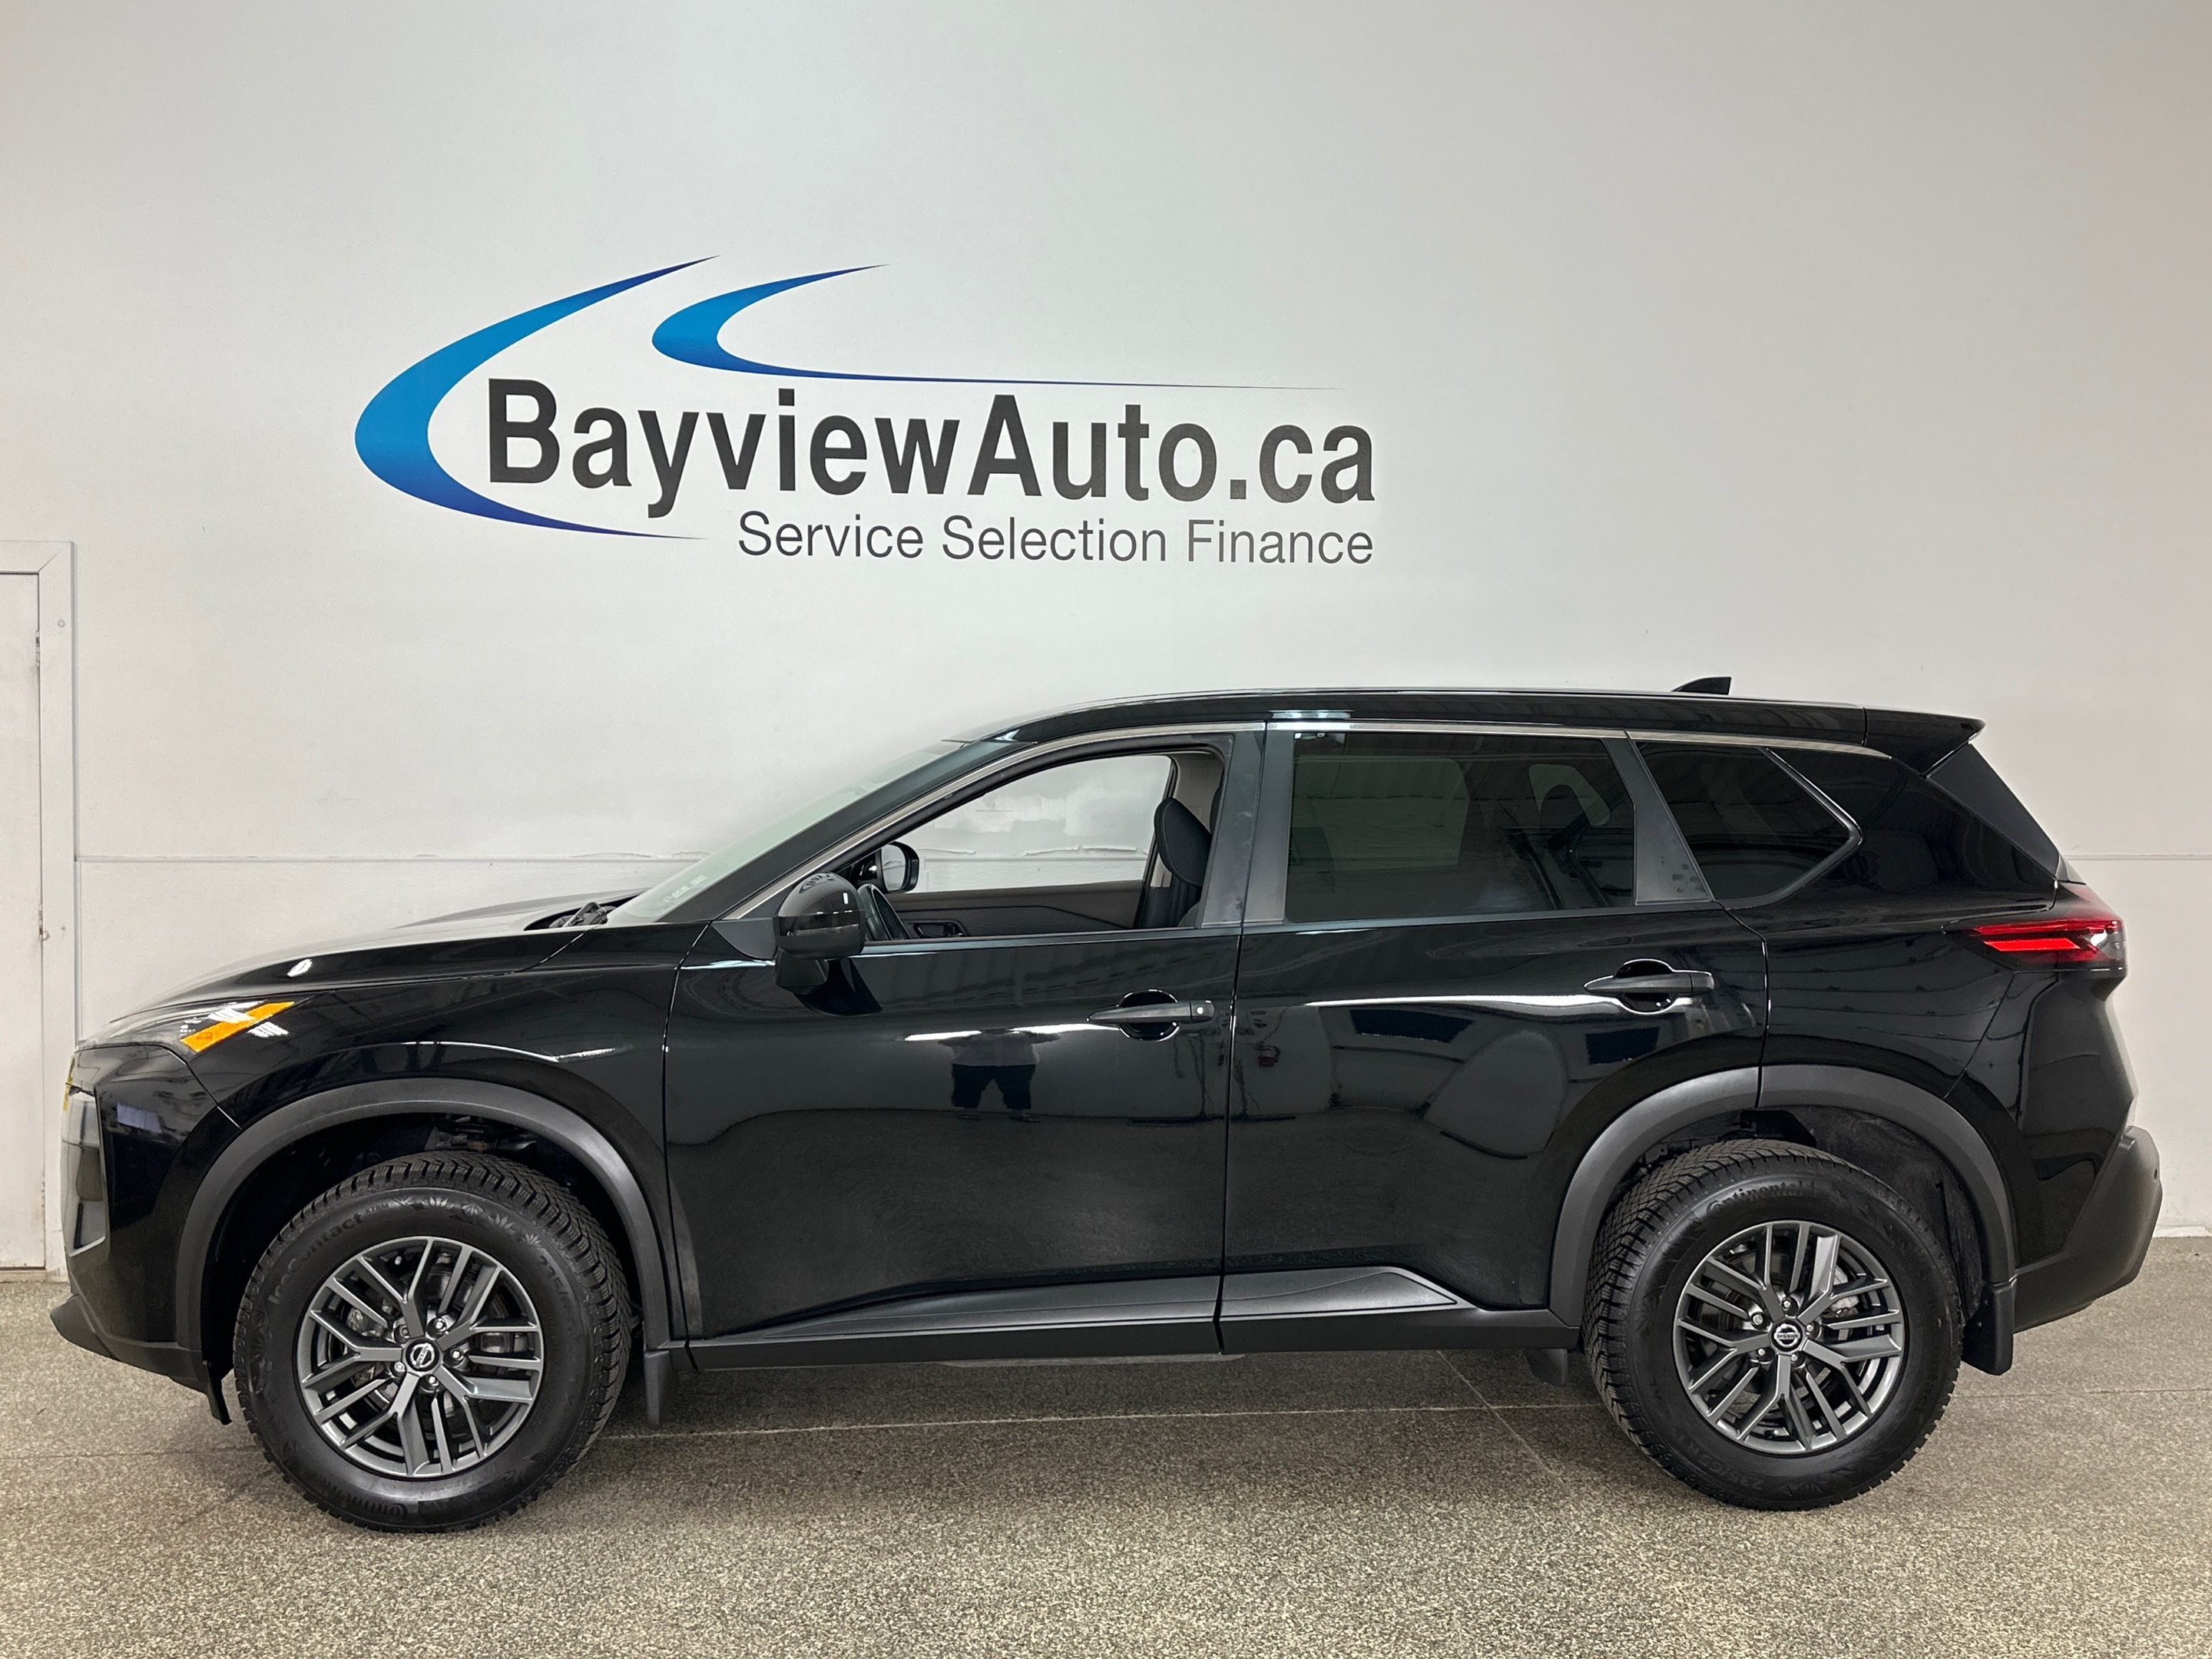 2021 Nissan Rogue S! BLACK! 73KM! ONE OWNER LEASE!